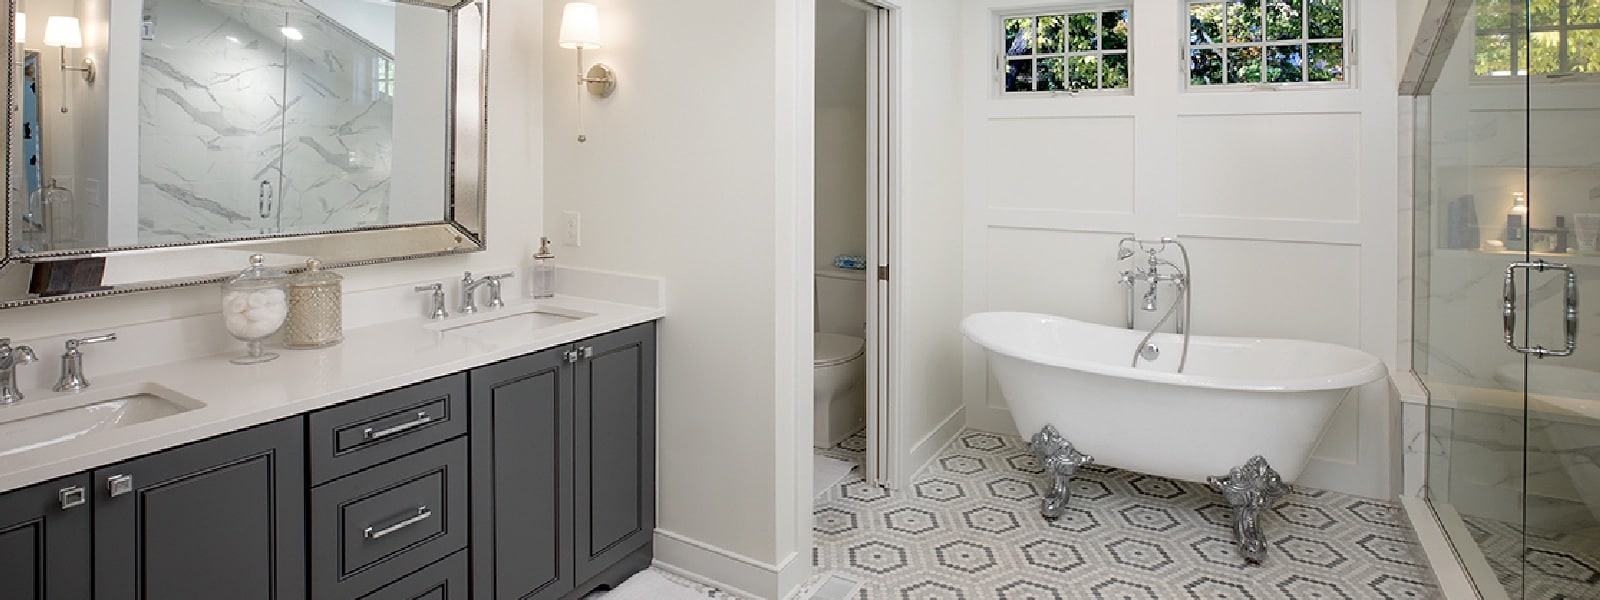 Susan's favorite projects include this historic Dublin bathroom renovation.